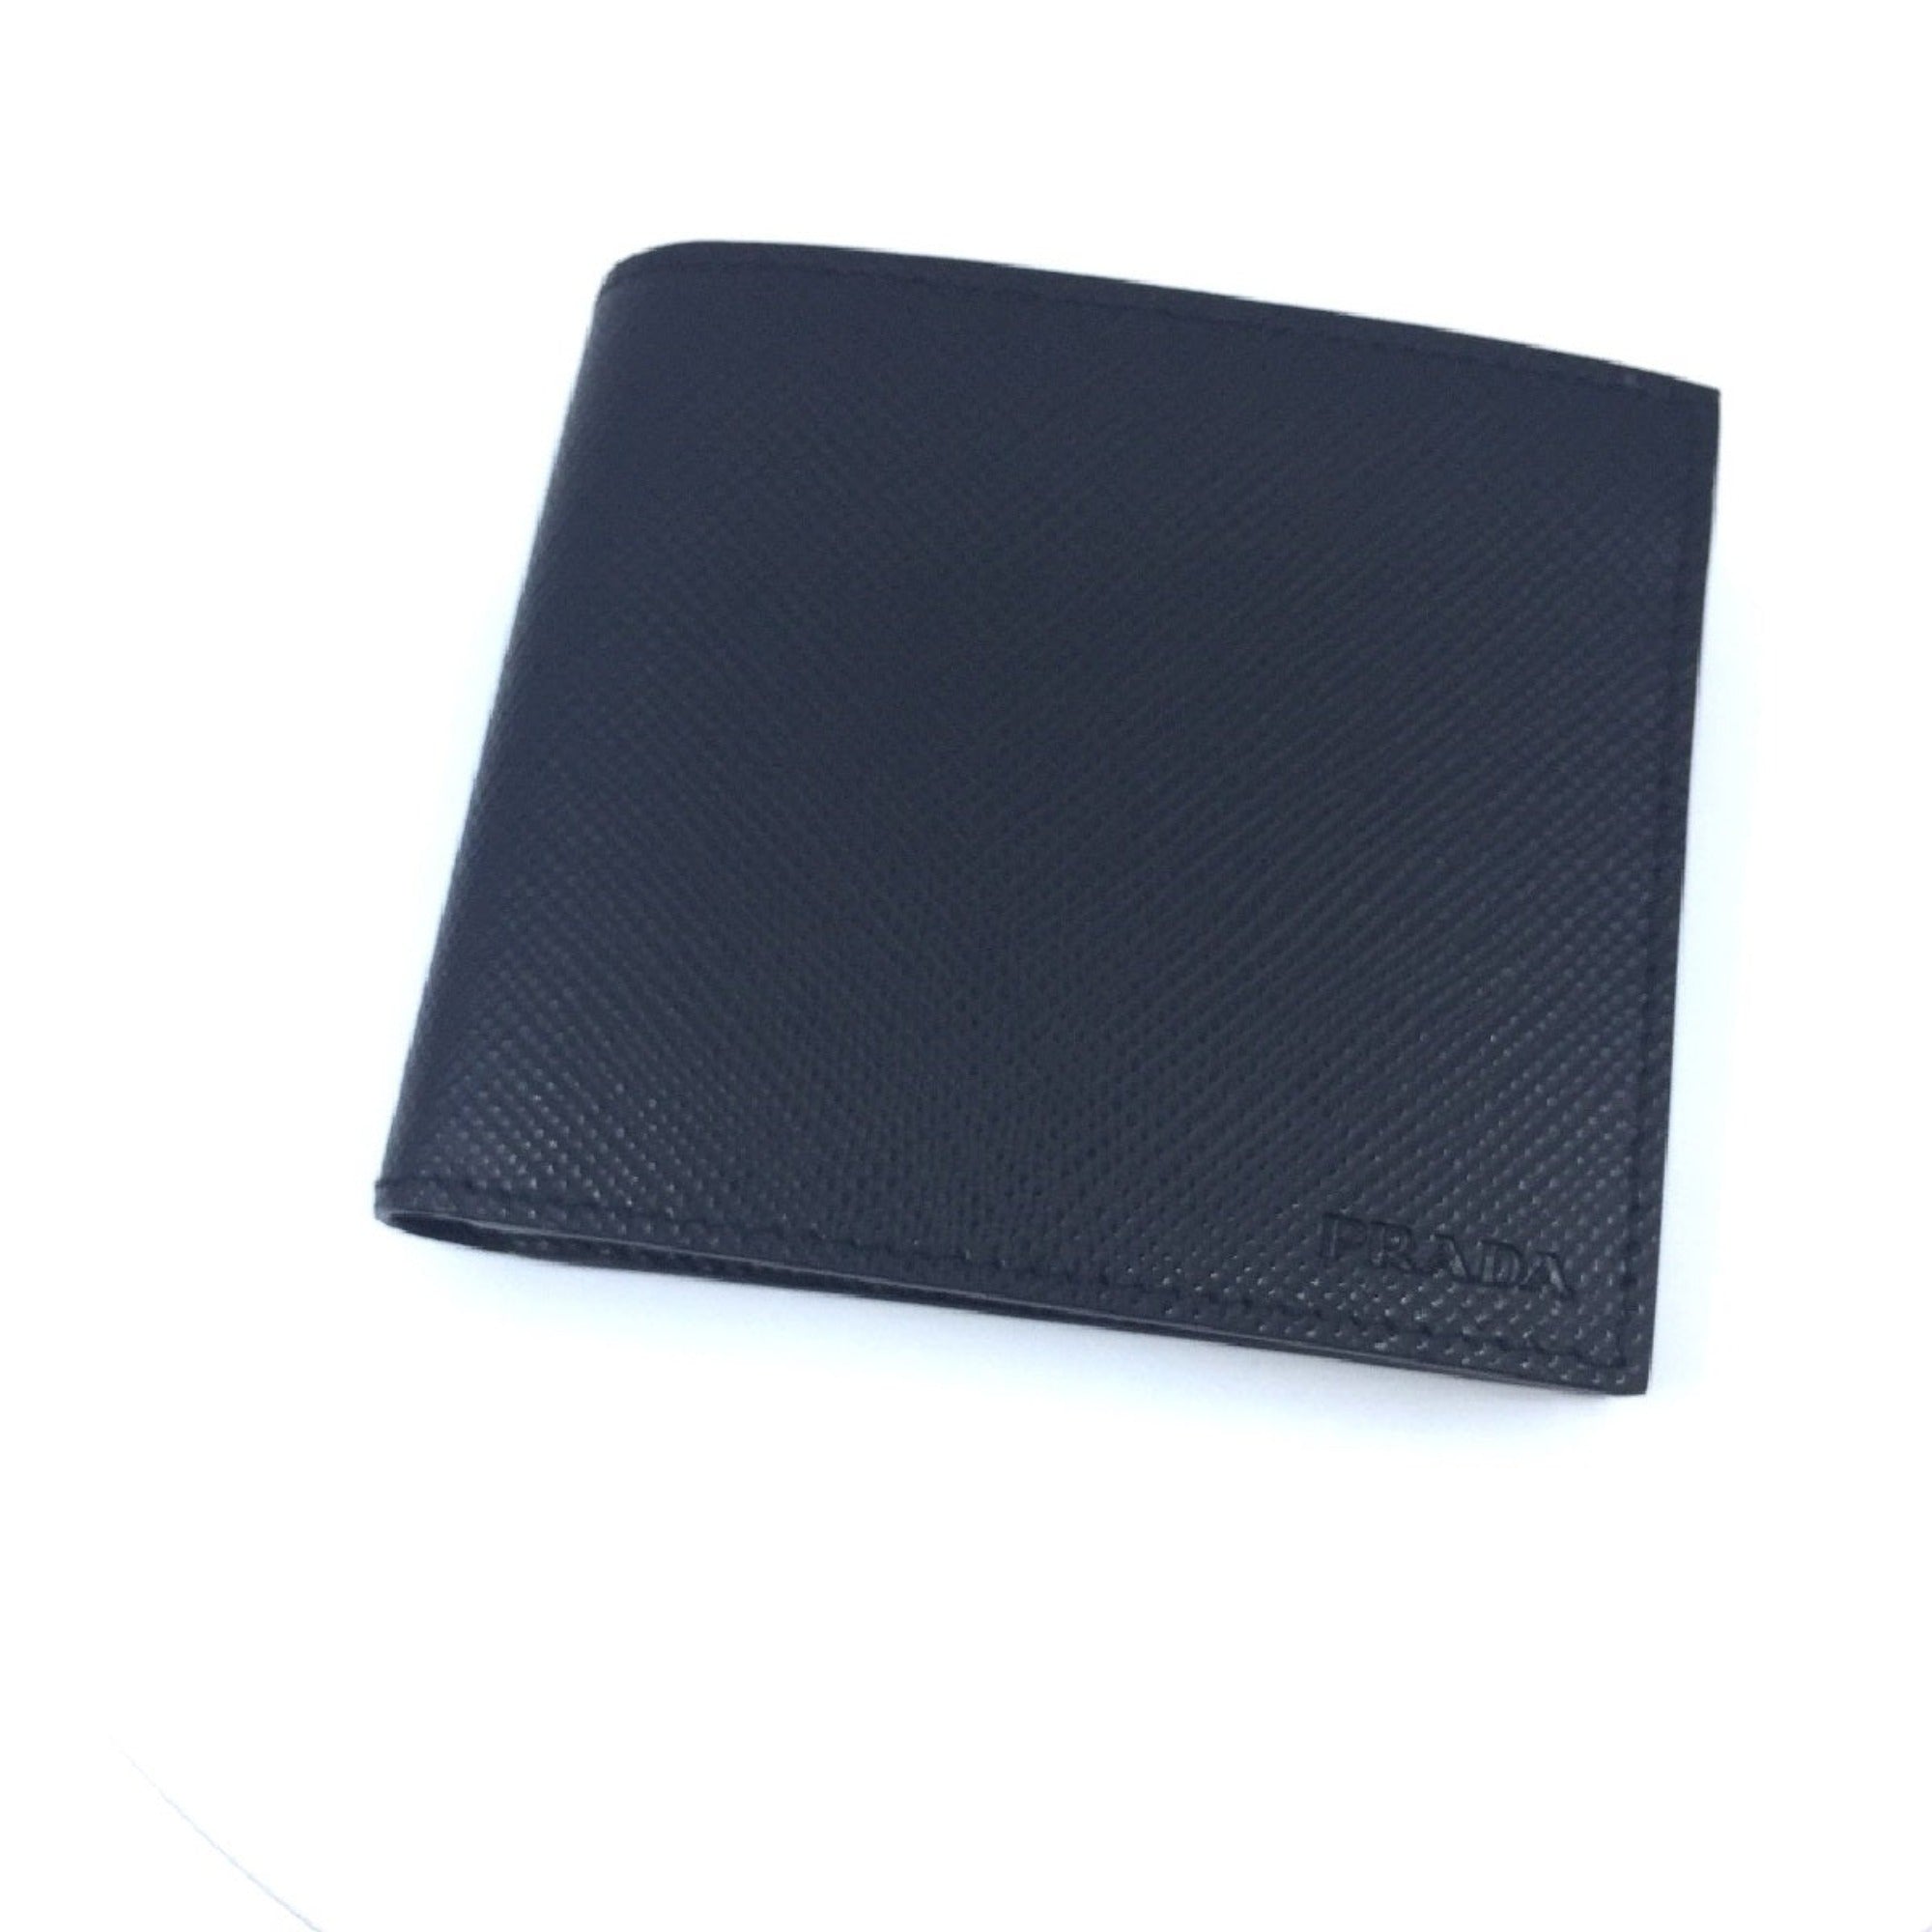 Prada Mens Nero Black Saffiano Leather Billfold Bifold Wallet 2MO513 at_Queen_Bee_of_Beverly_Hills